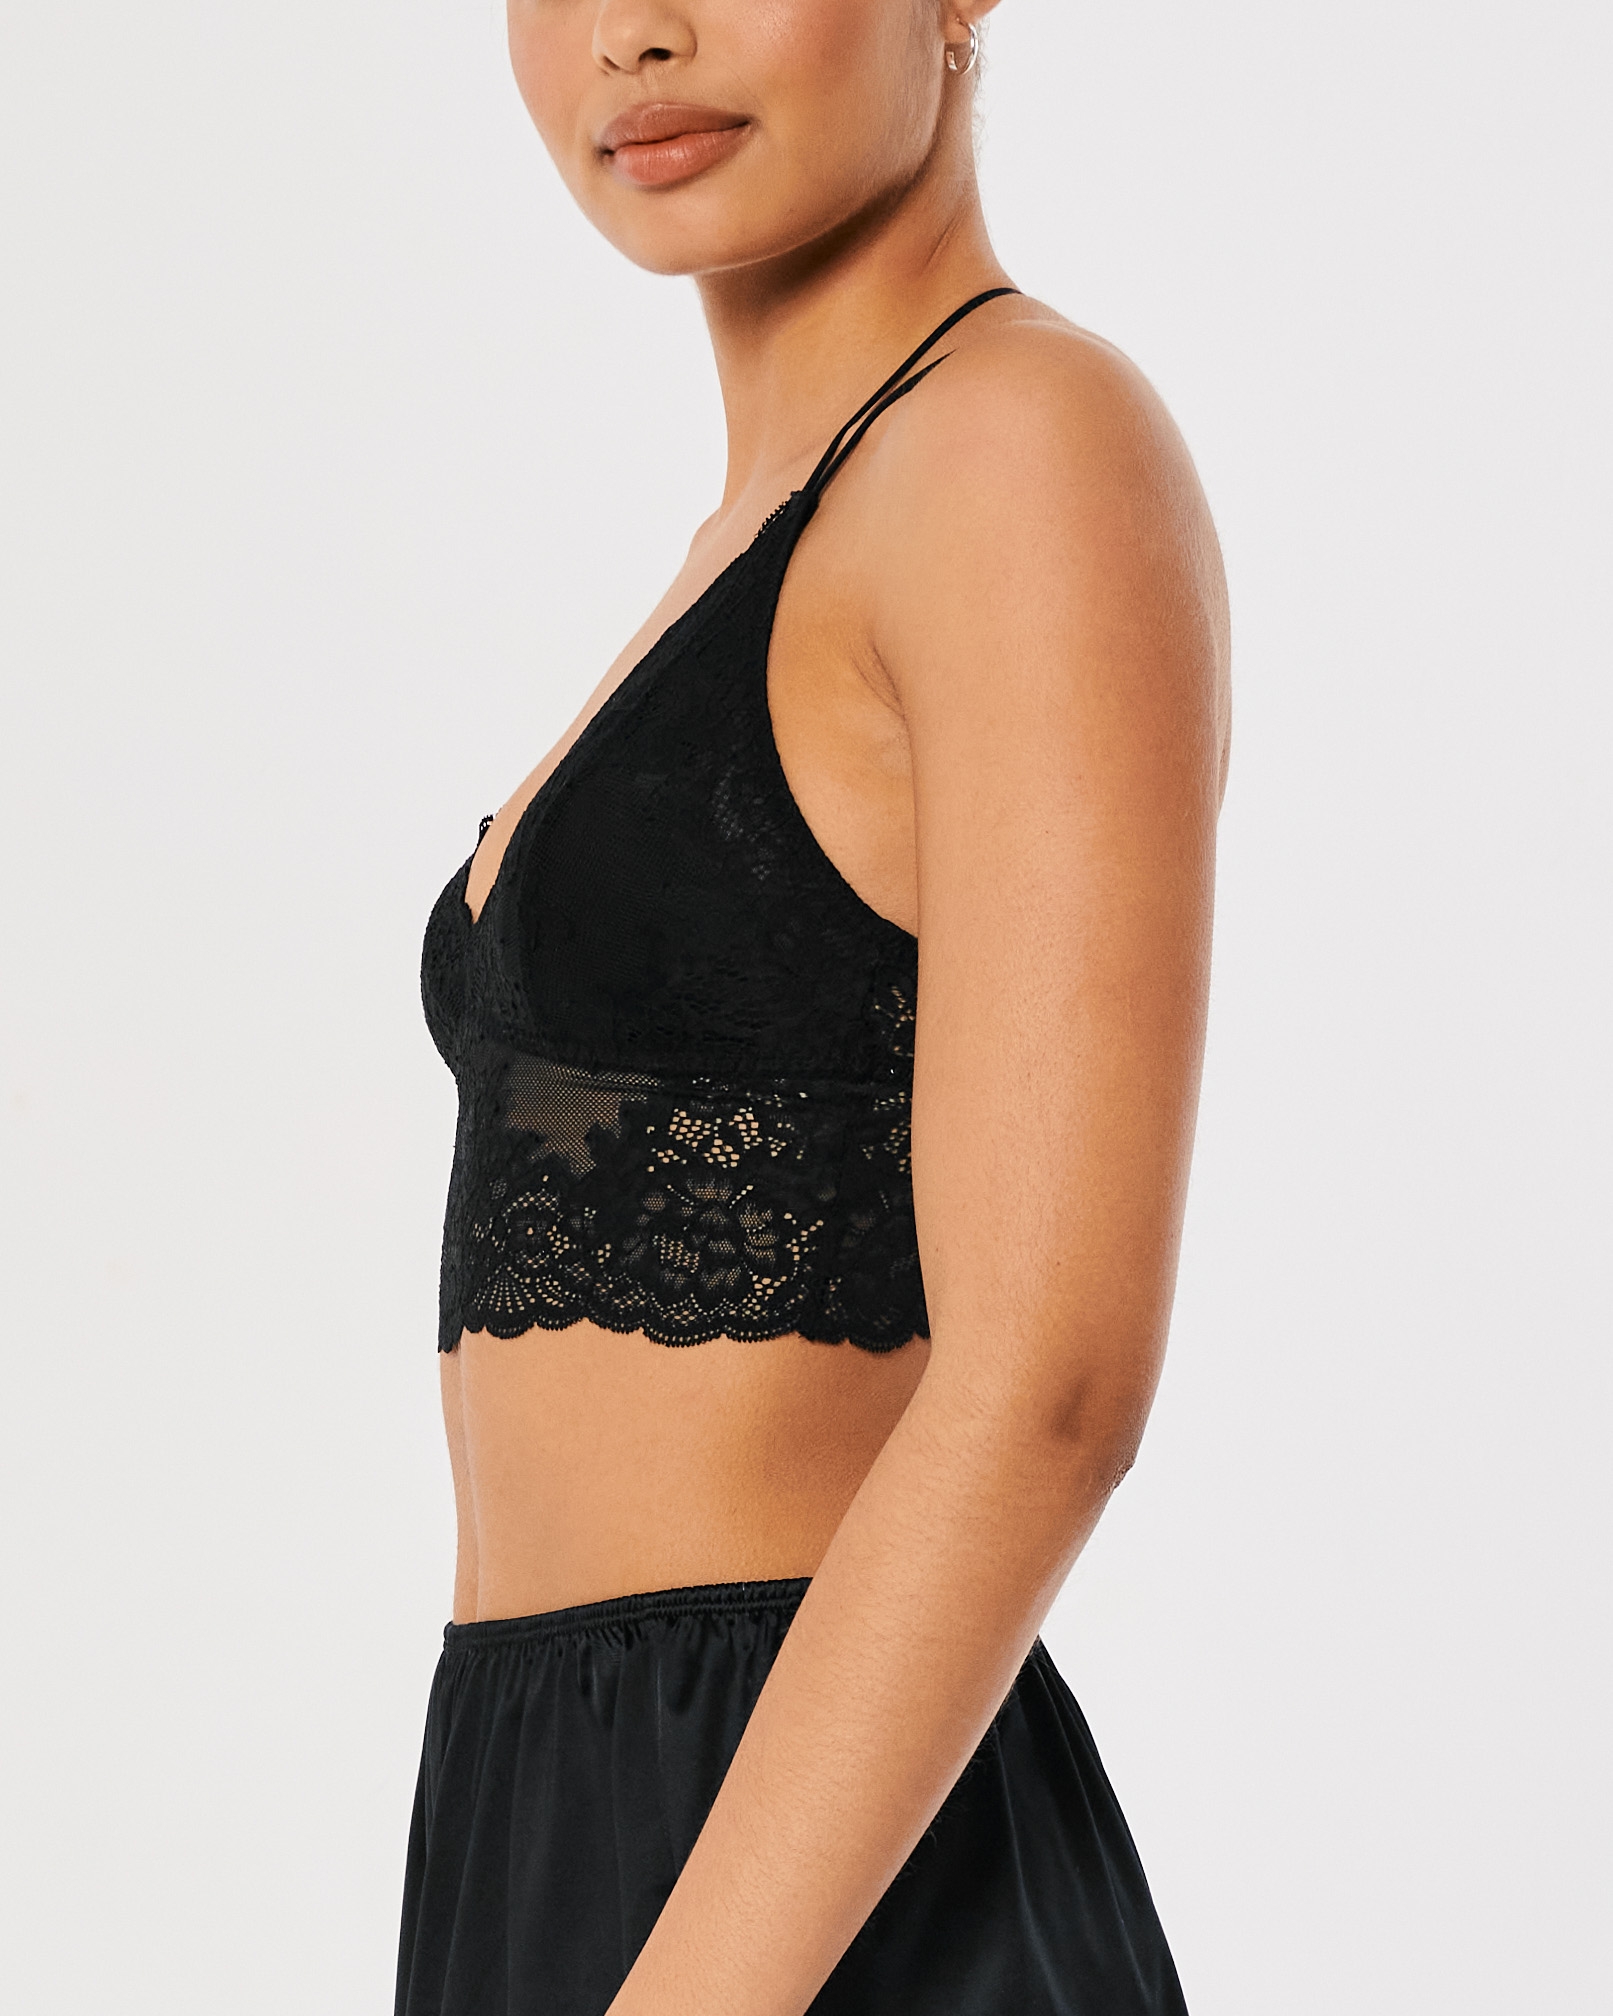 Hollister Gilly Hicks Longline Lace Triangle Bralette